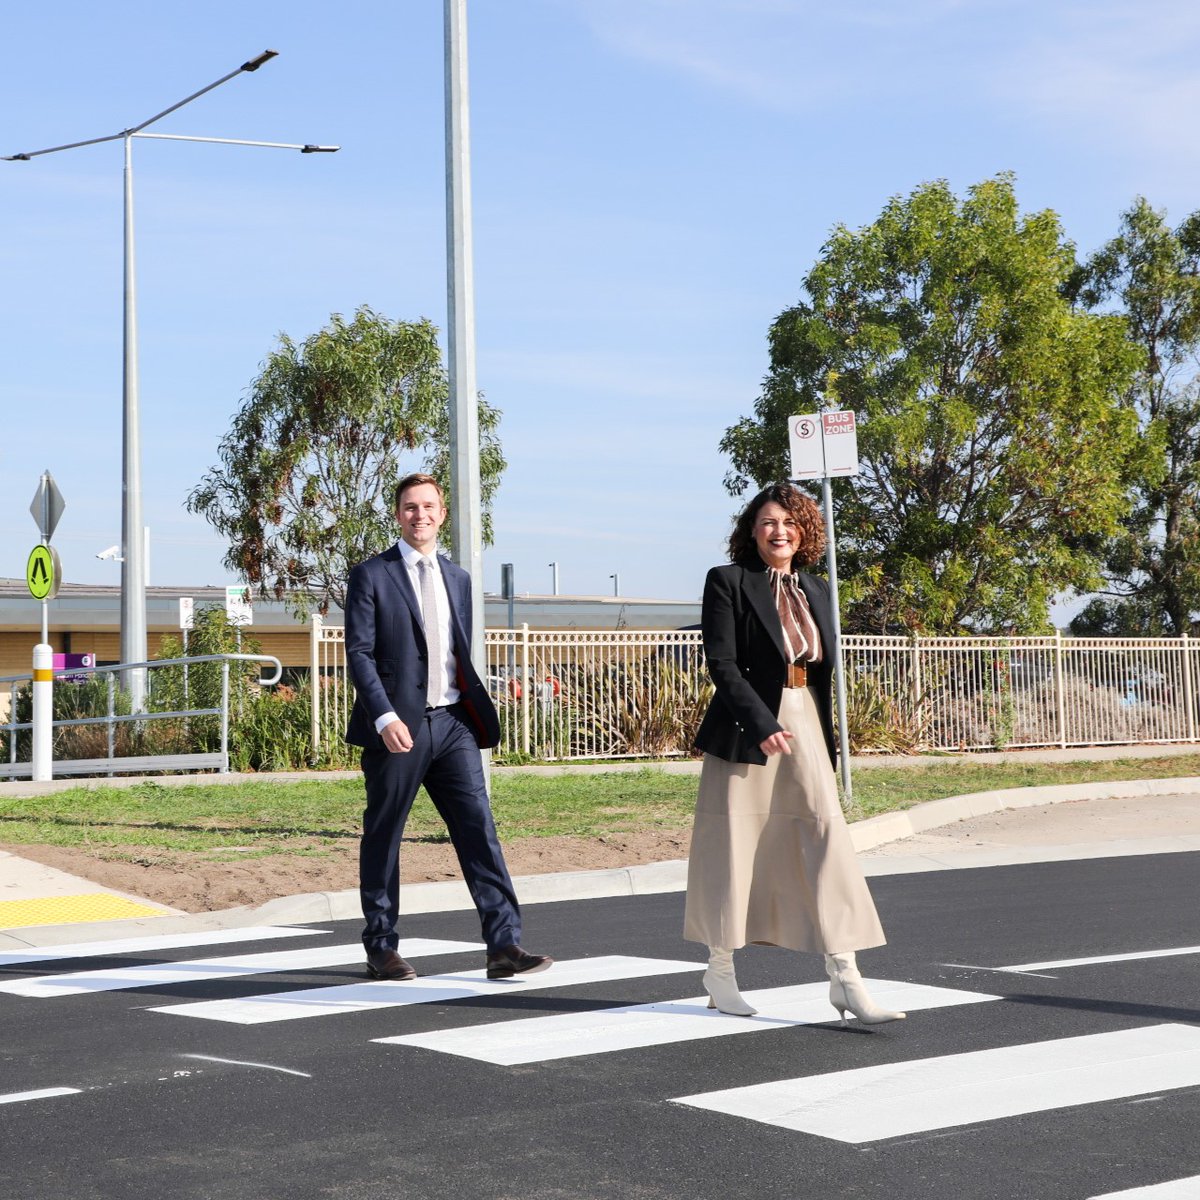 A $2.1 million upgrade of Sugargum Drive and Bodega Street in Waurn Ponds is complete, creating improved conditions near Waurn Ponds Station. 🛠️Our design, program delivery and construction teams completed the Australian Government-funded development six weeks ahead of schedule.